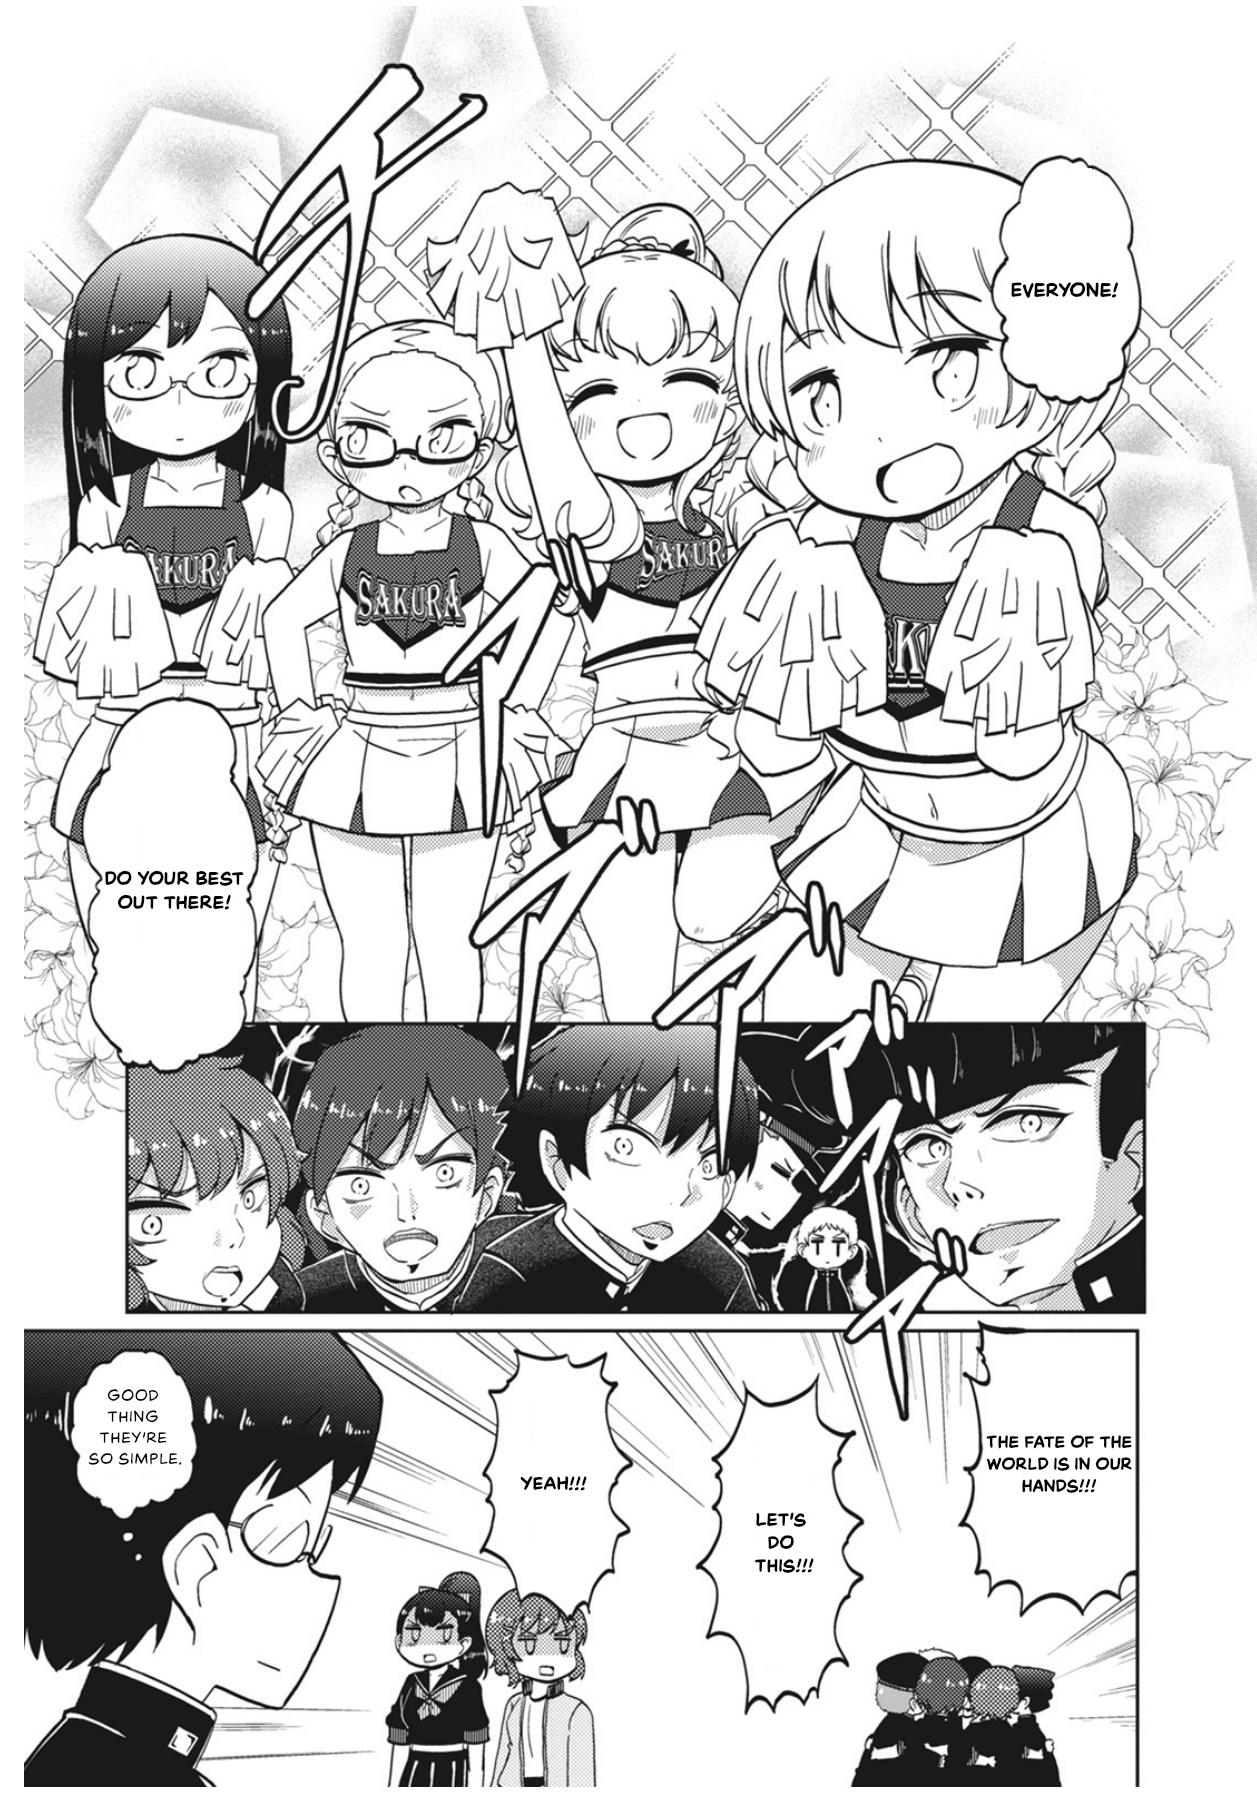 4-Panel 13 Sentinels: Aegis Rim This Is Sector X - chapter 10.5 - #5